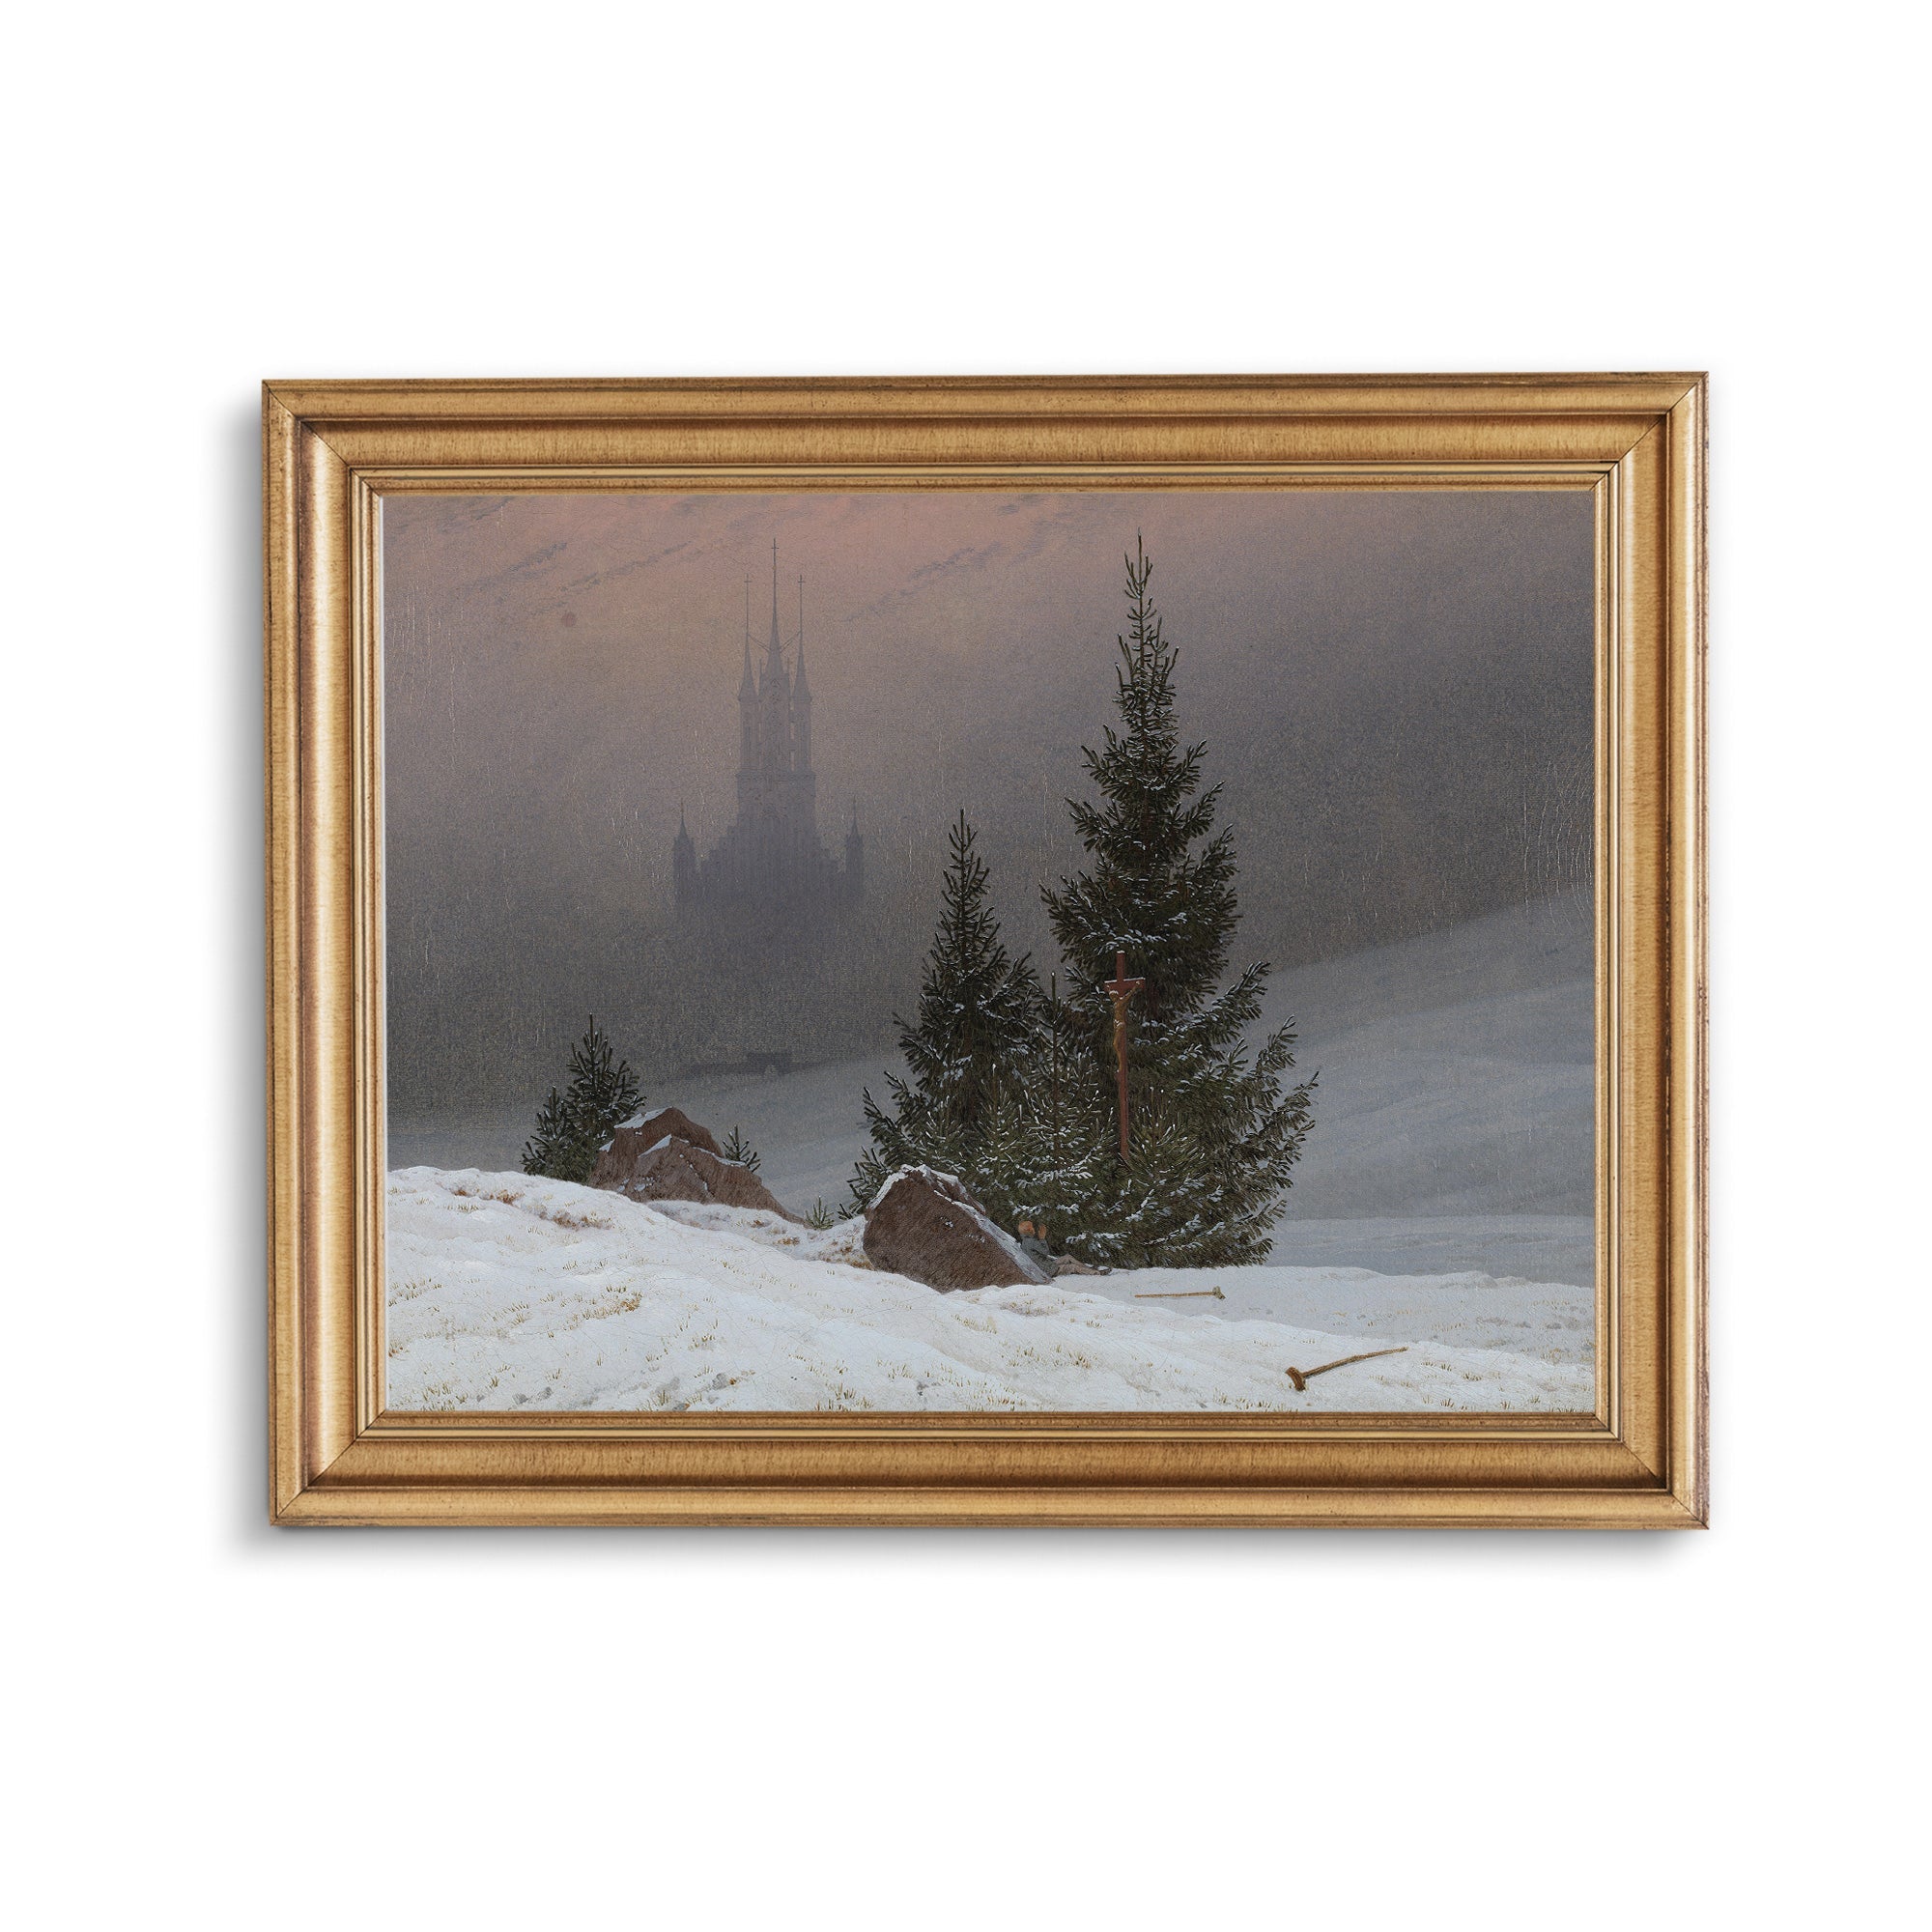 Misty Winter Cathedral: Snow-Covered Pines Art Print - Hartsholme Prints